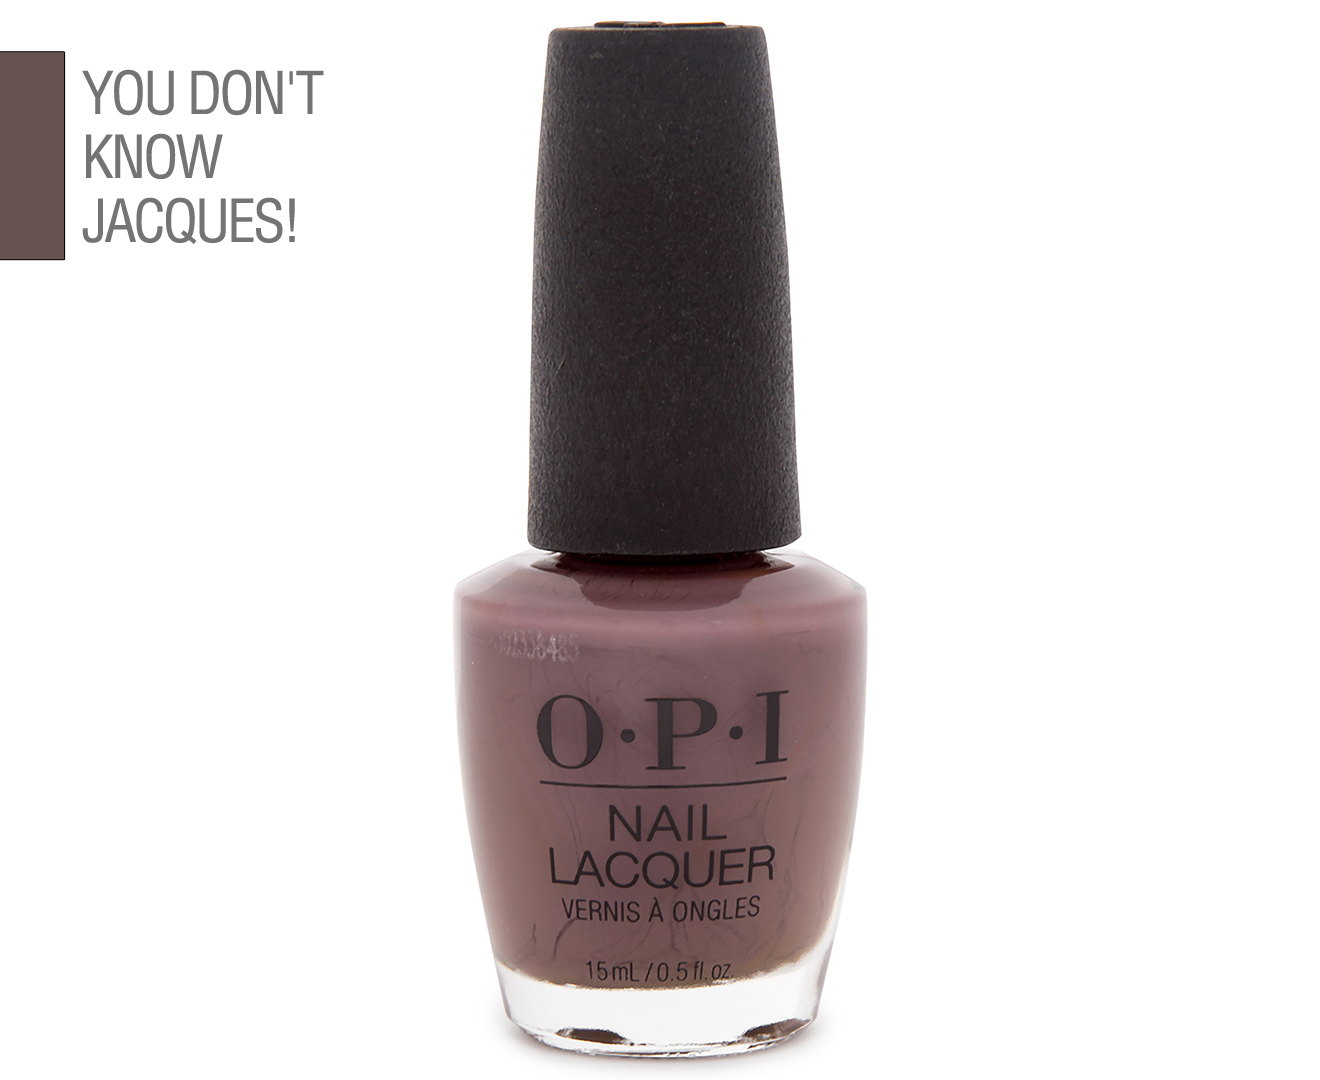 8. OPI Nail Lacquer - You Don't Know Jacques! - wide 10